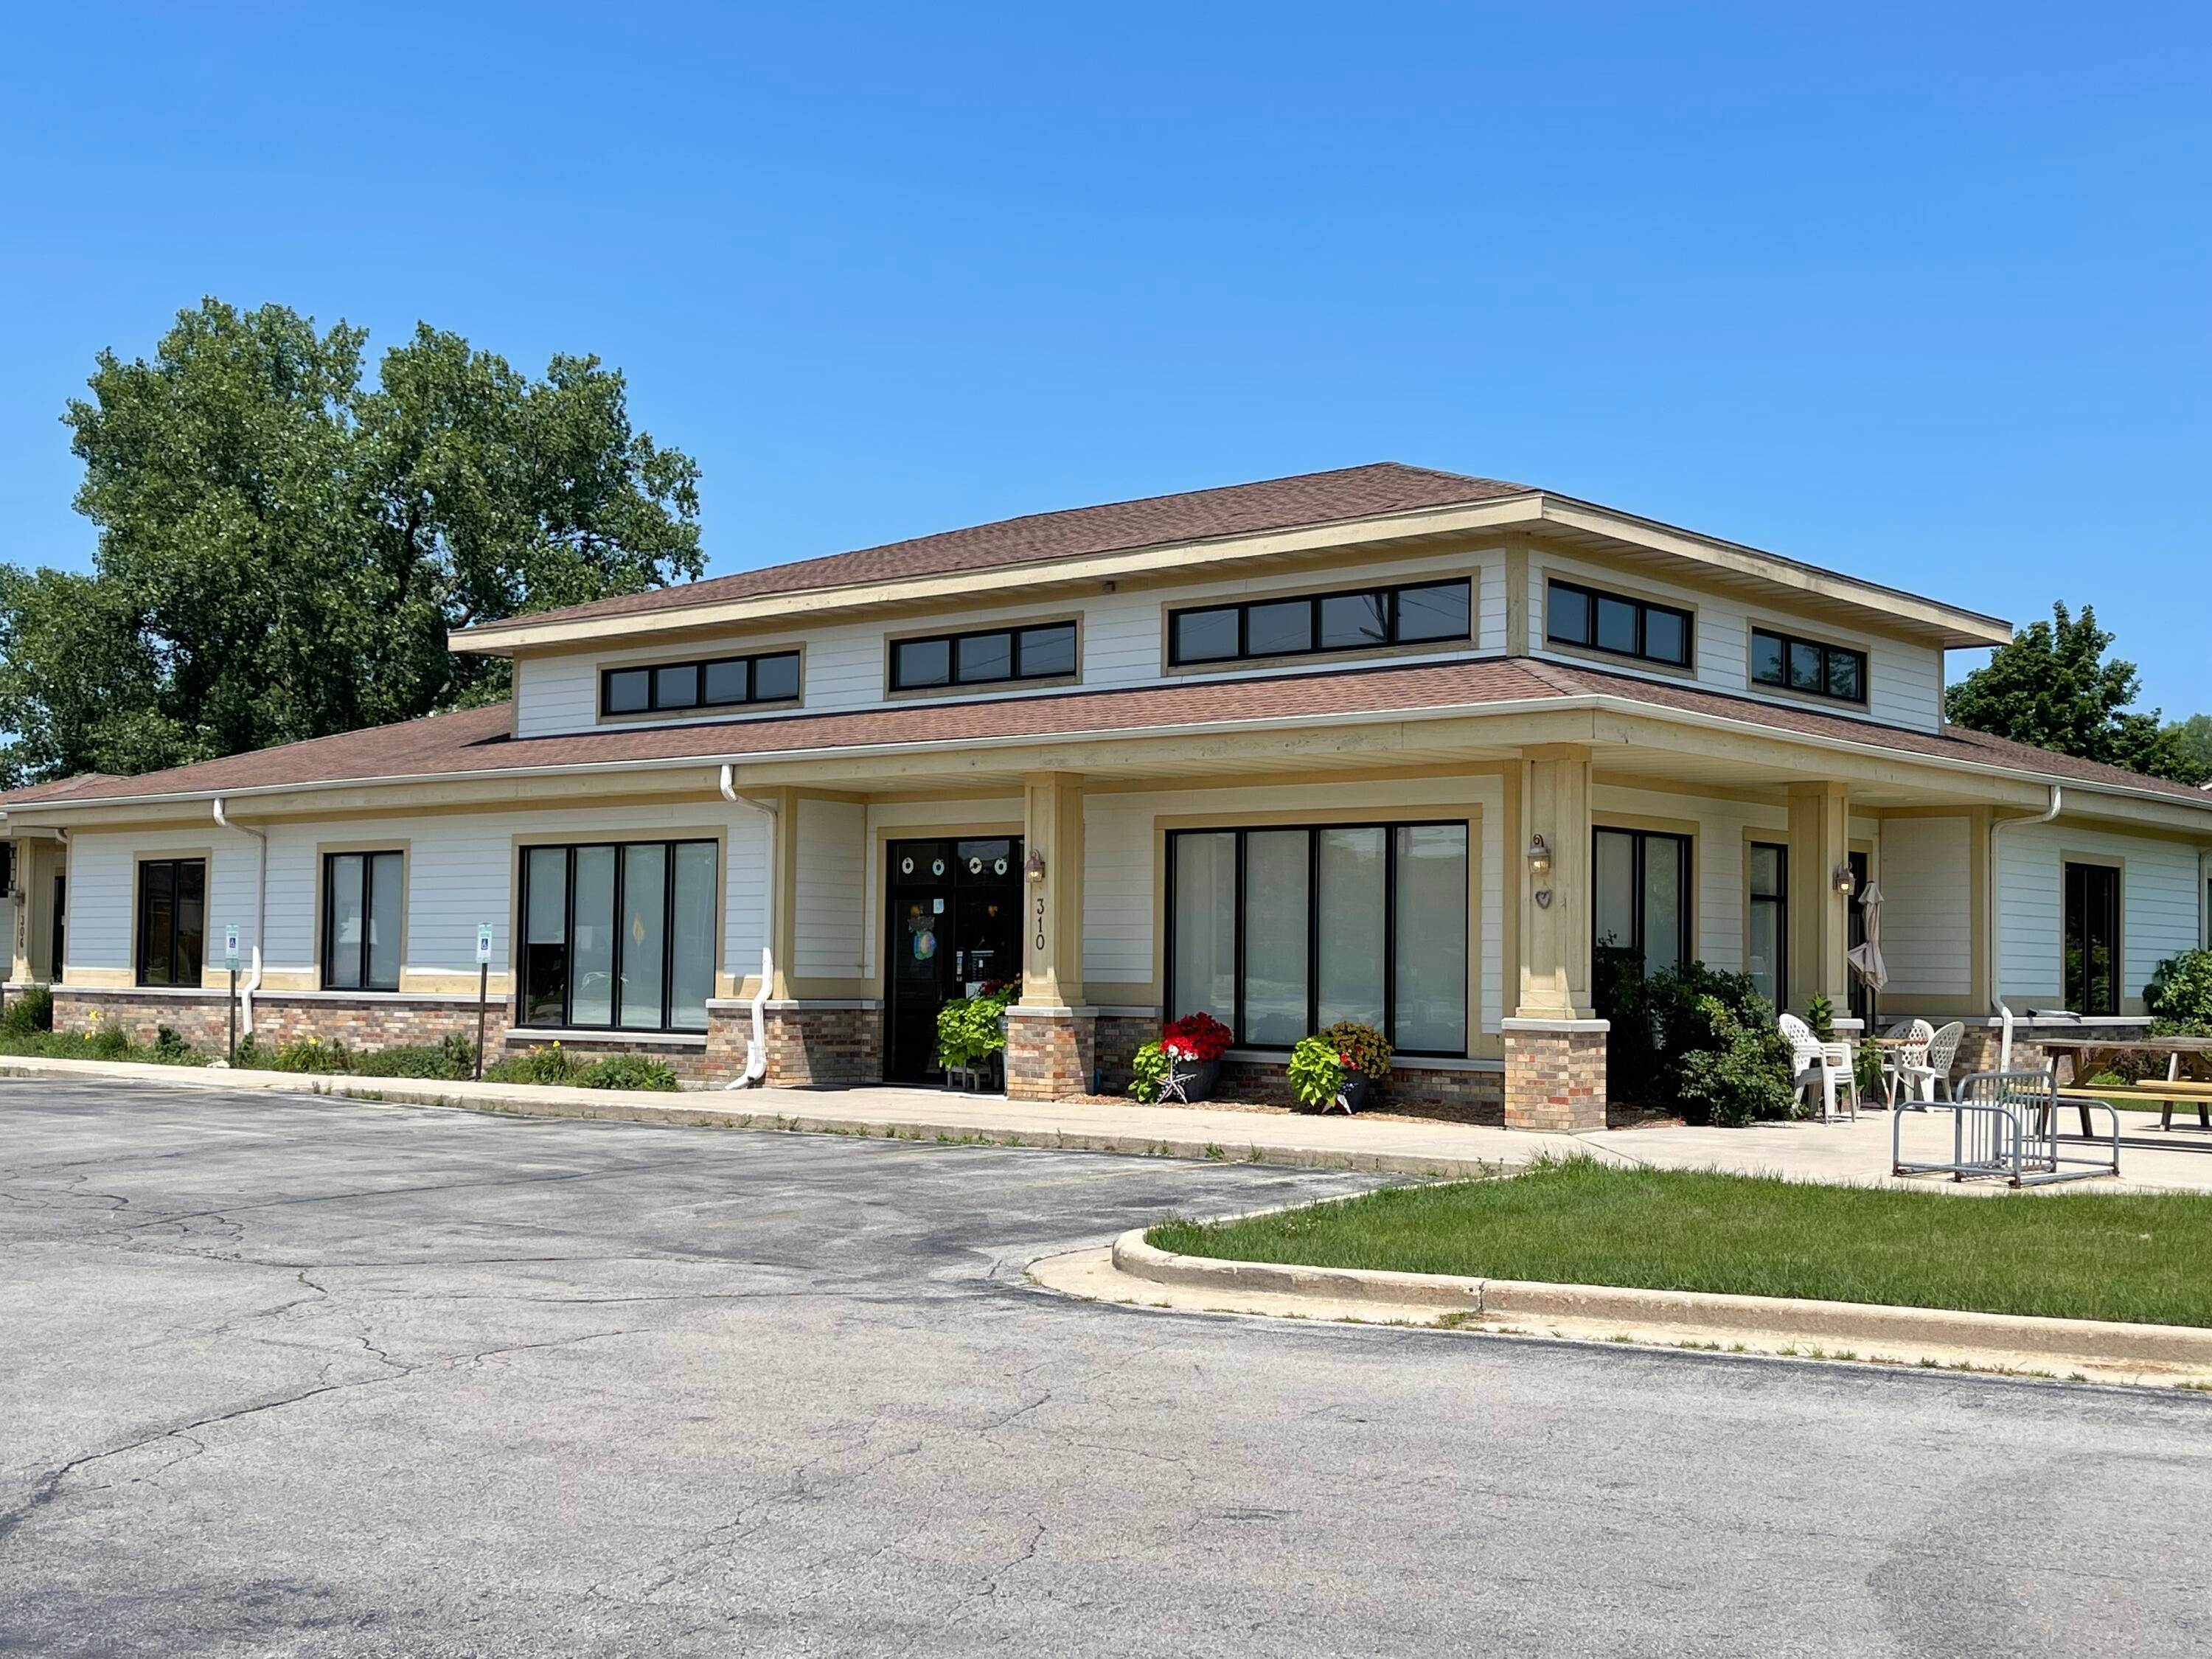 Commercial / Industrial for Sale at 310 E Washington Street Slinger, Wisconsin 53086 United States